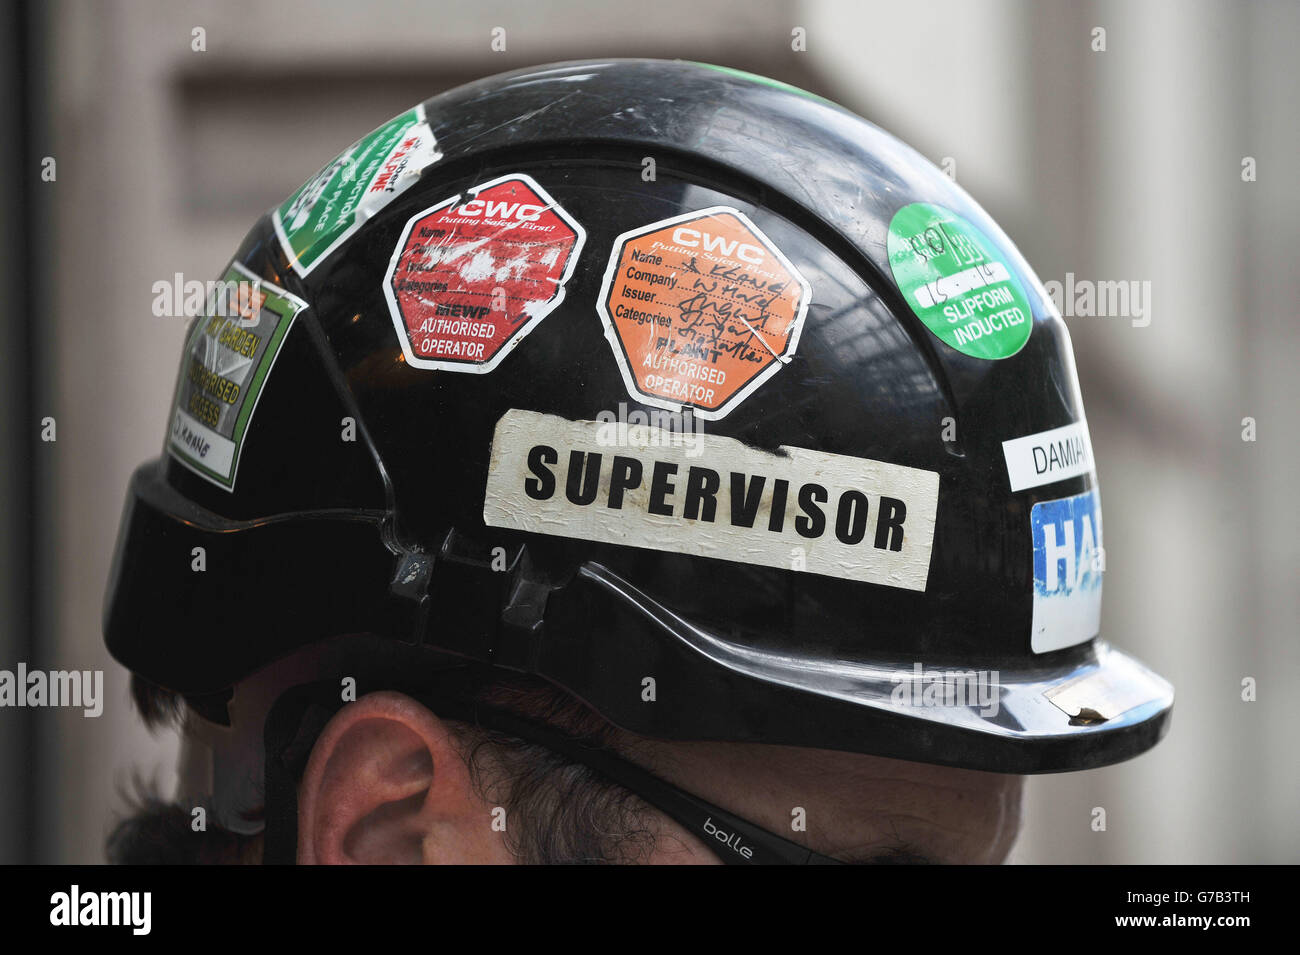 Stock photo of safety stickers on the hard hat of a construction worker at  the site of the new offices of Bloomberg situated between Mansion House and  Cannon Street stations in the